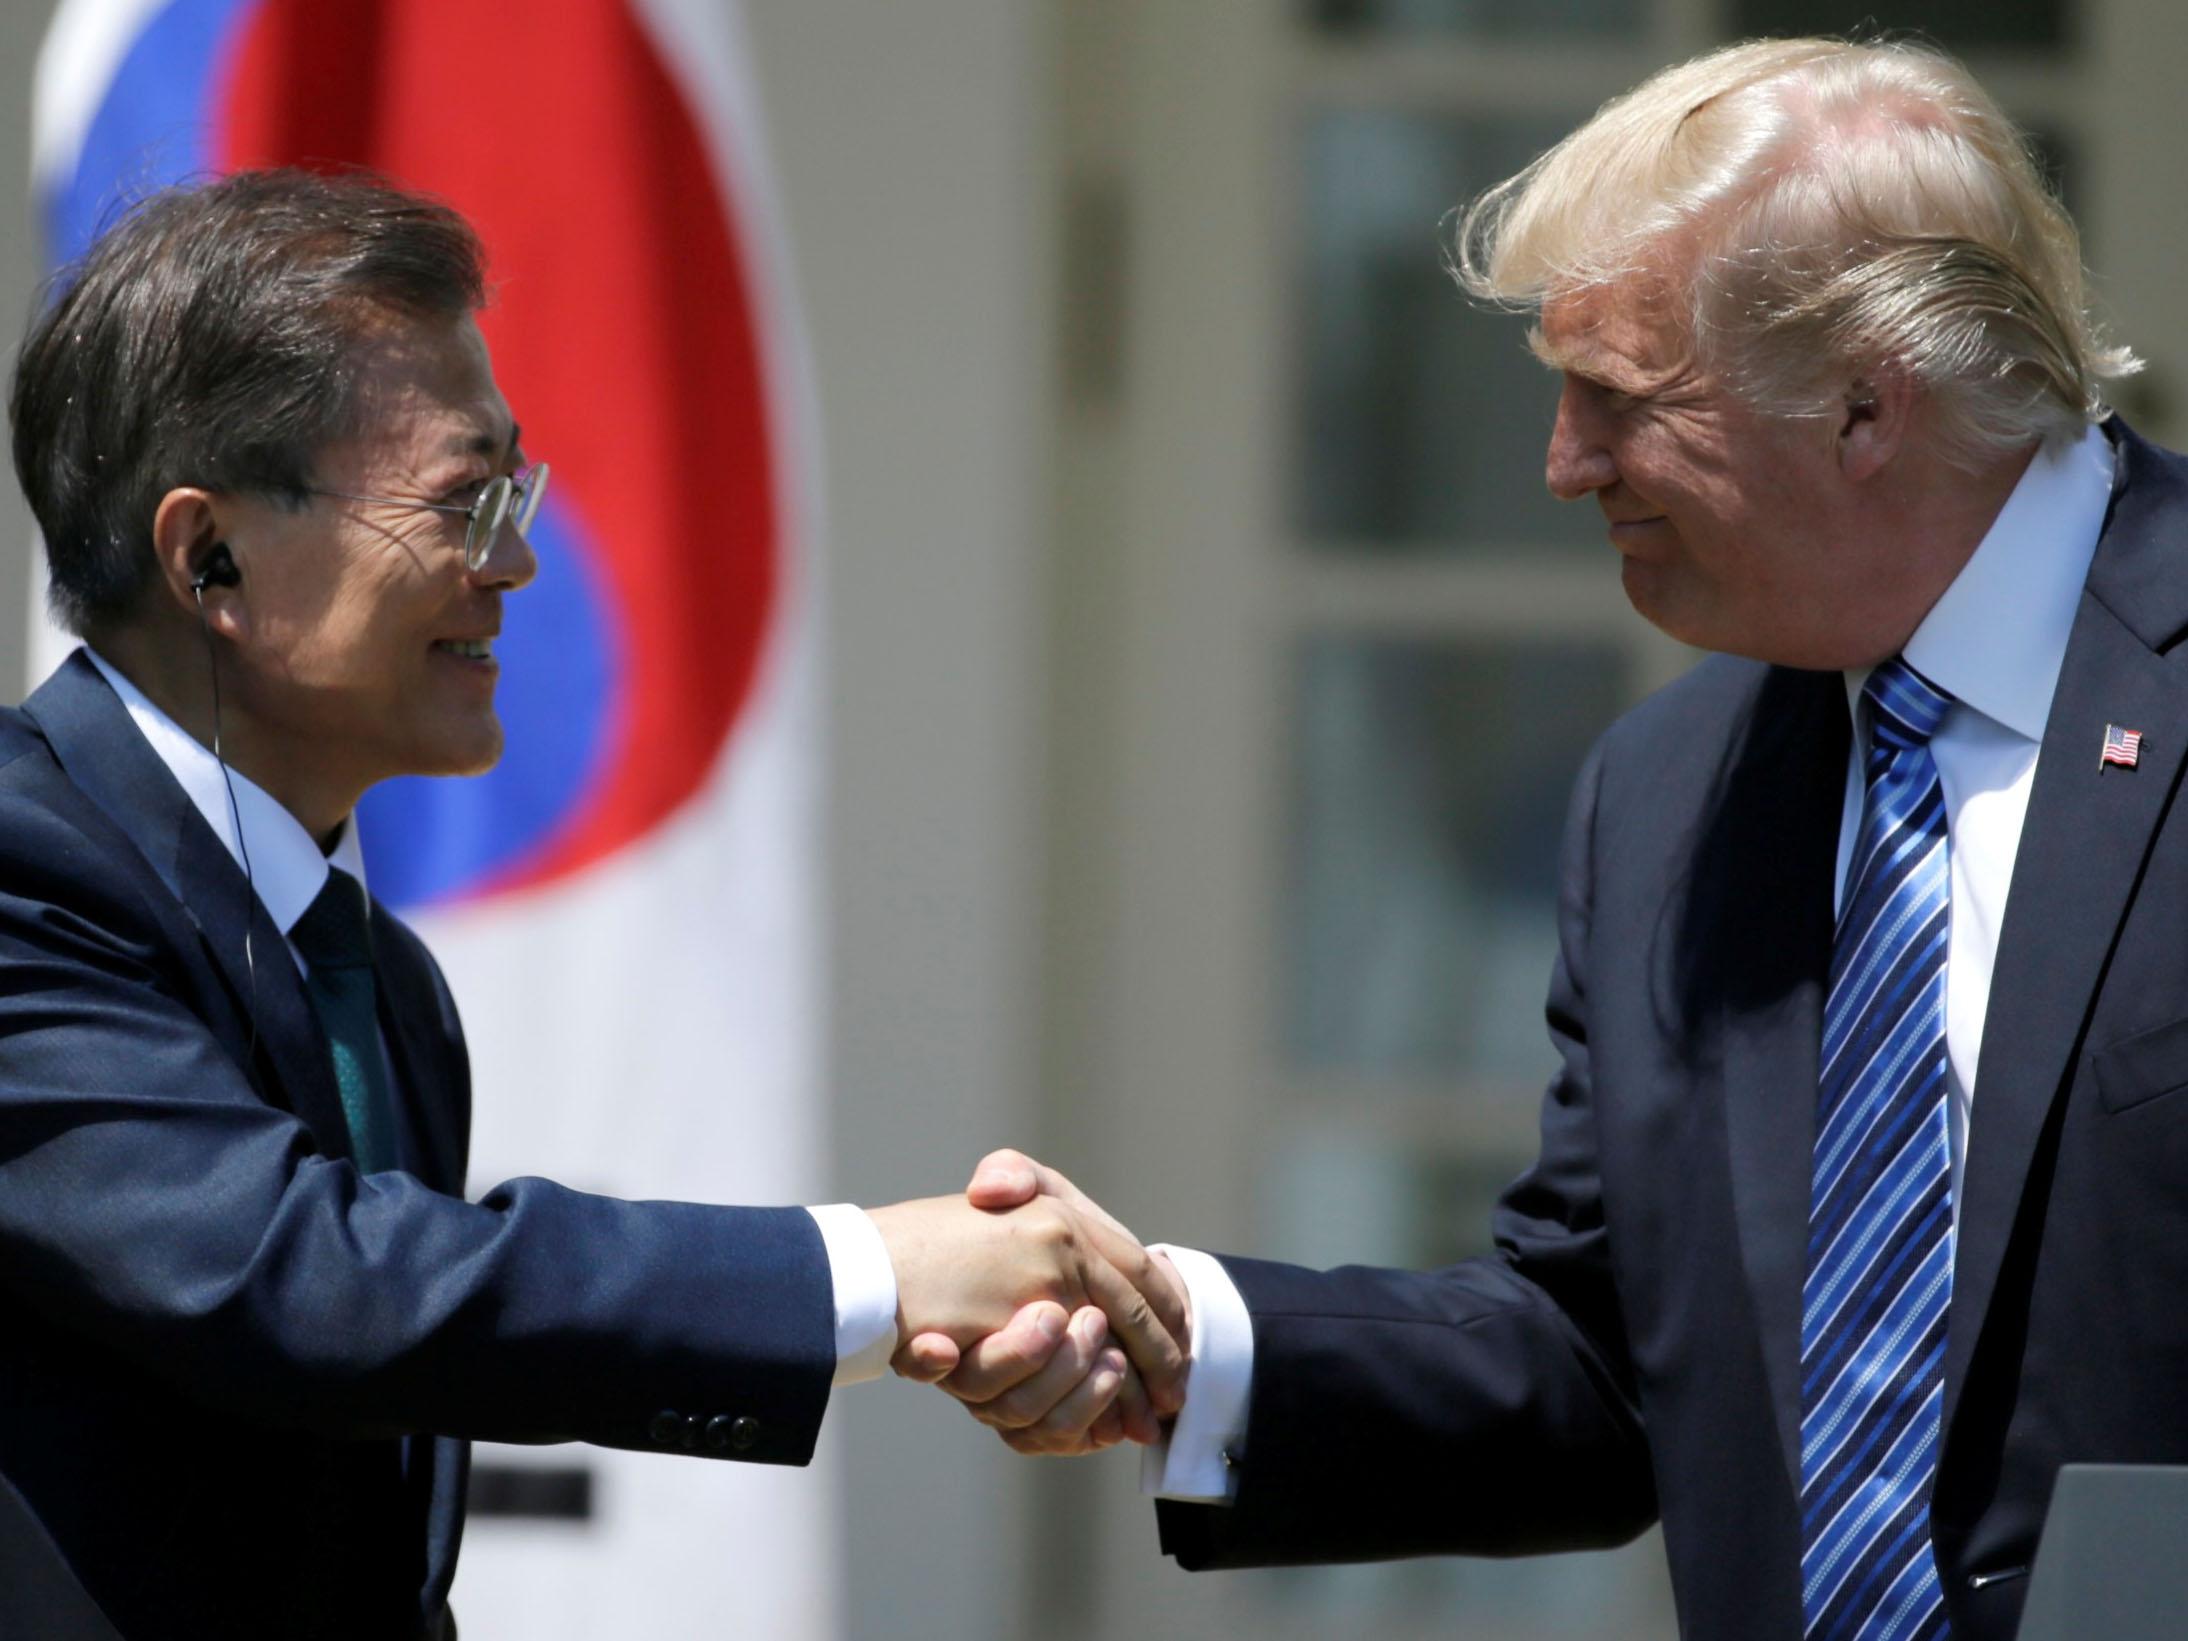 Mr Trump gave his ‘conceptual approval’ to sale of American military to South Korea after request by President Moon Jae-in